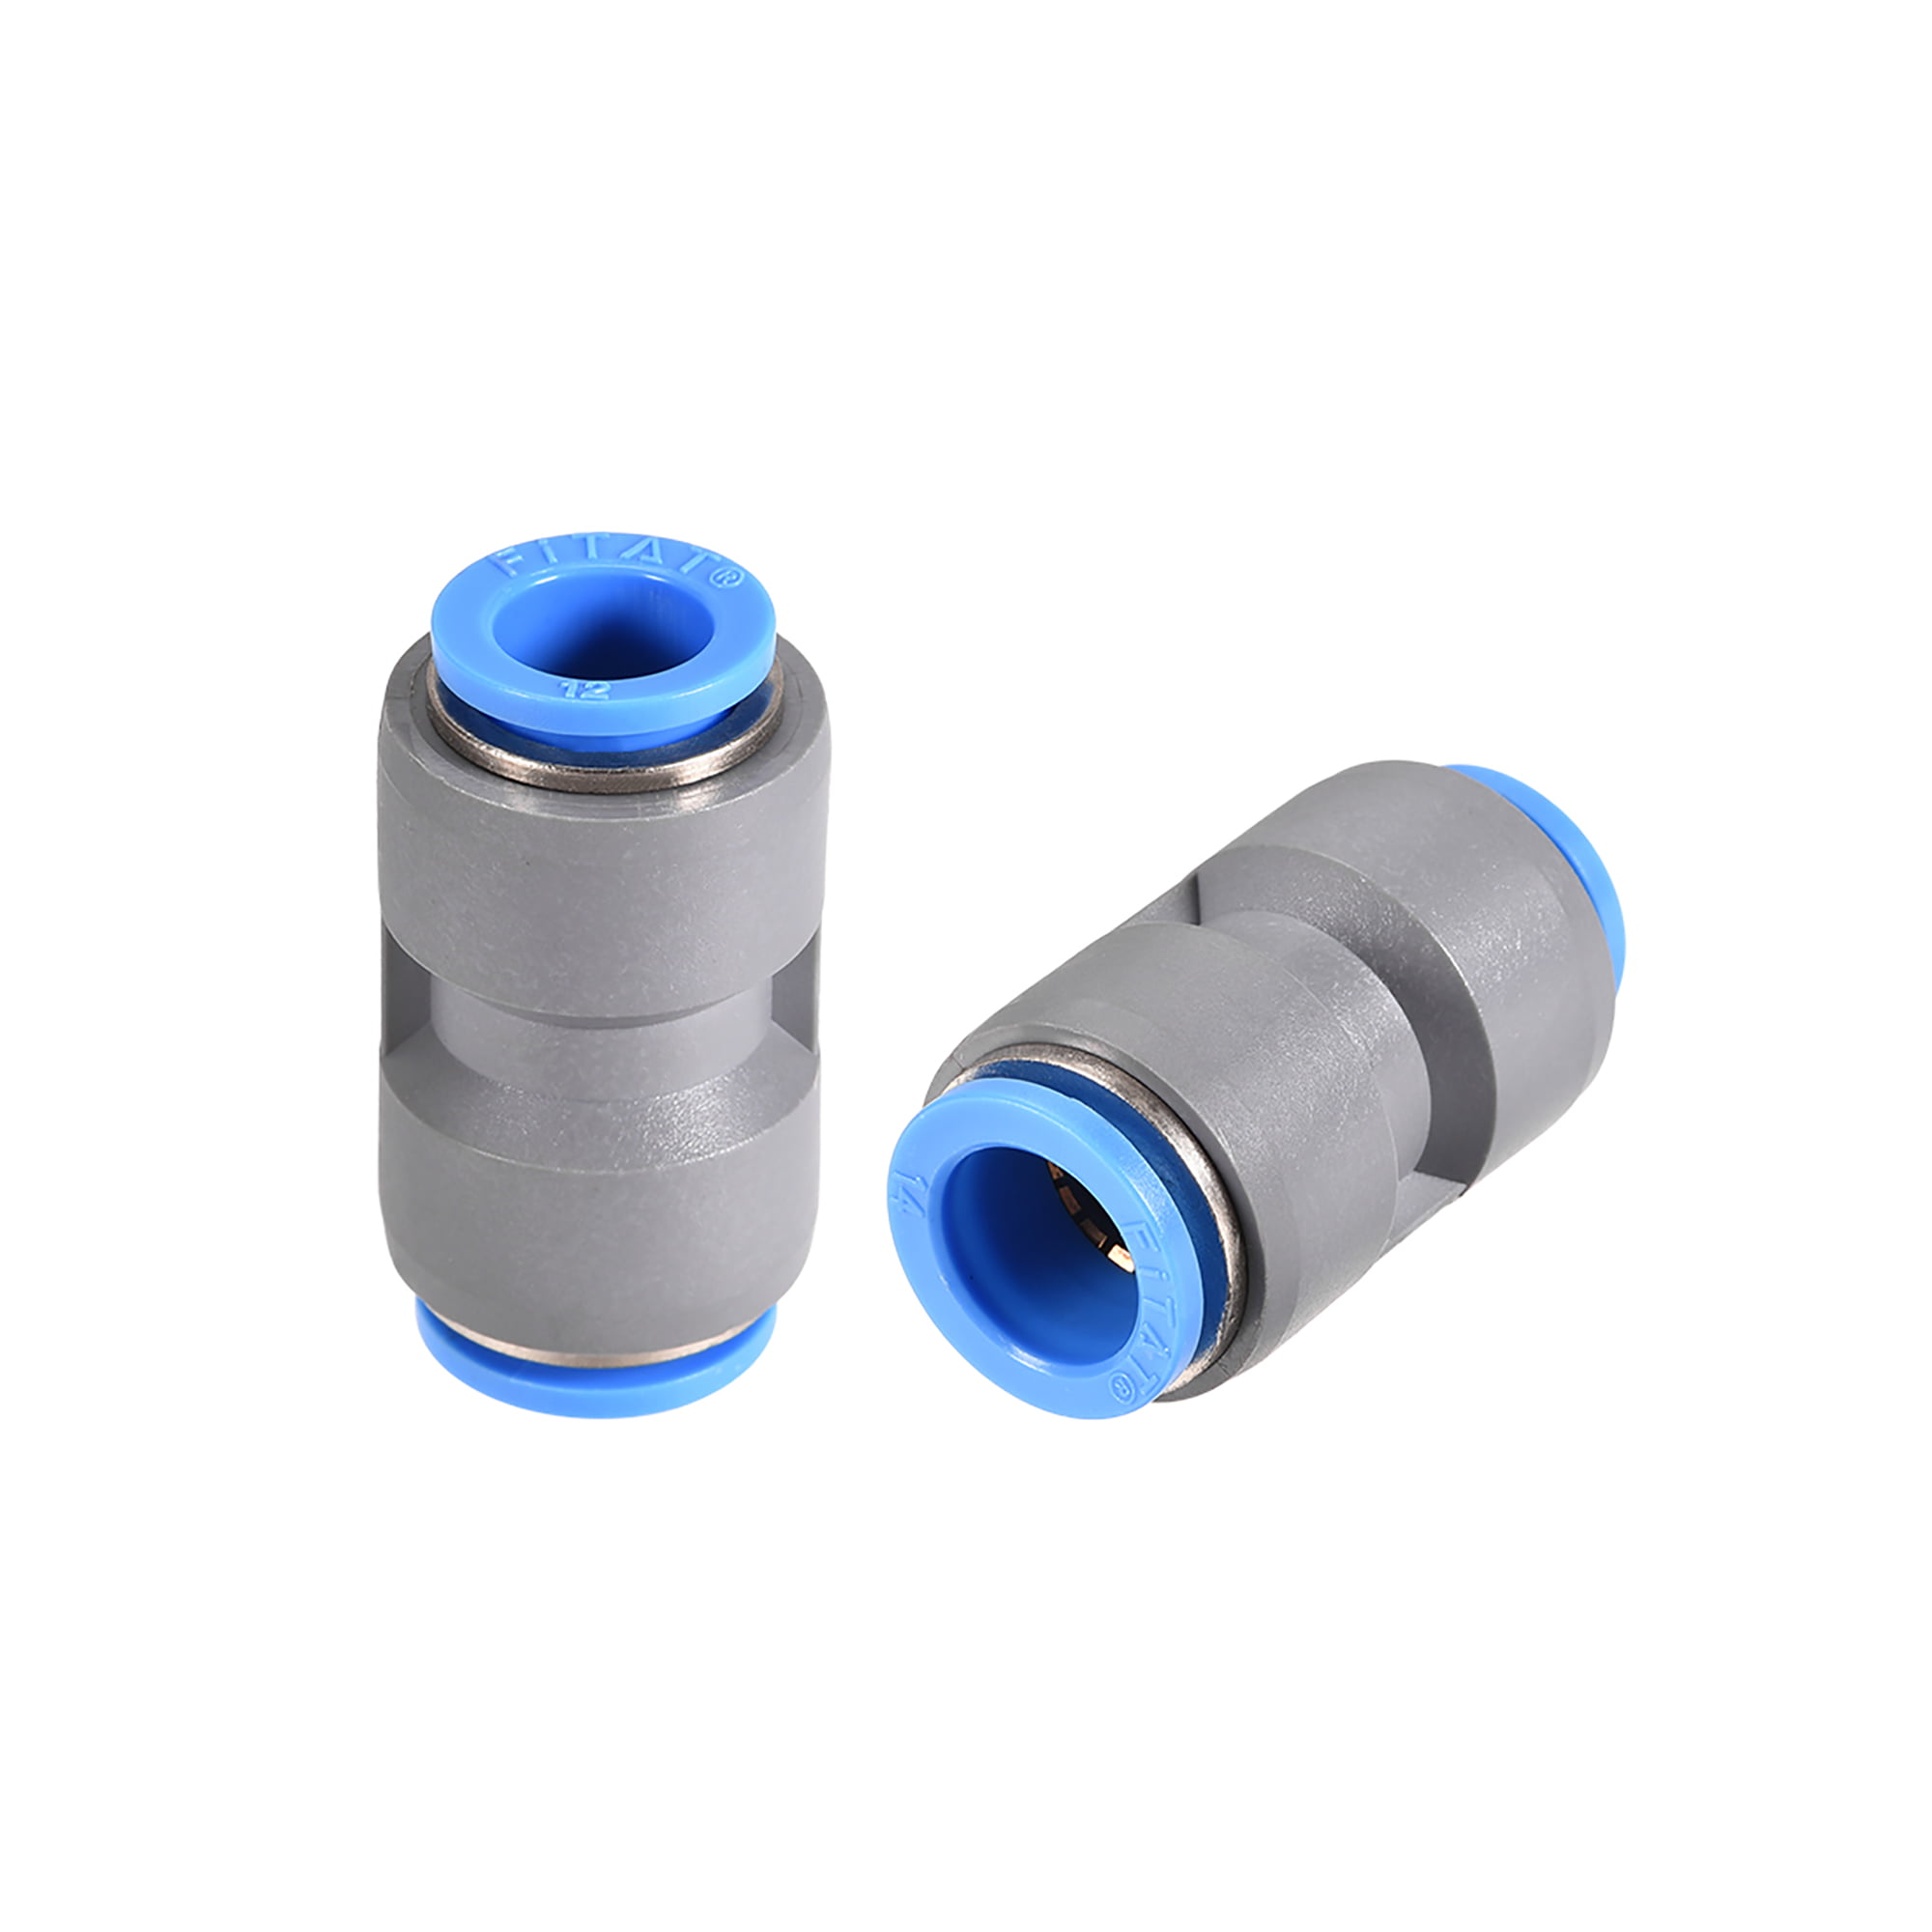 Straight Push Connectors 14mm to 12mm Quick Release Pneumatic Connector Quick Release Button Connectors Telescoping Tubing